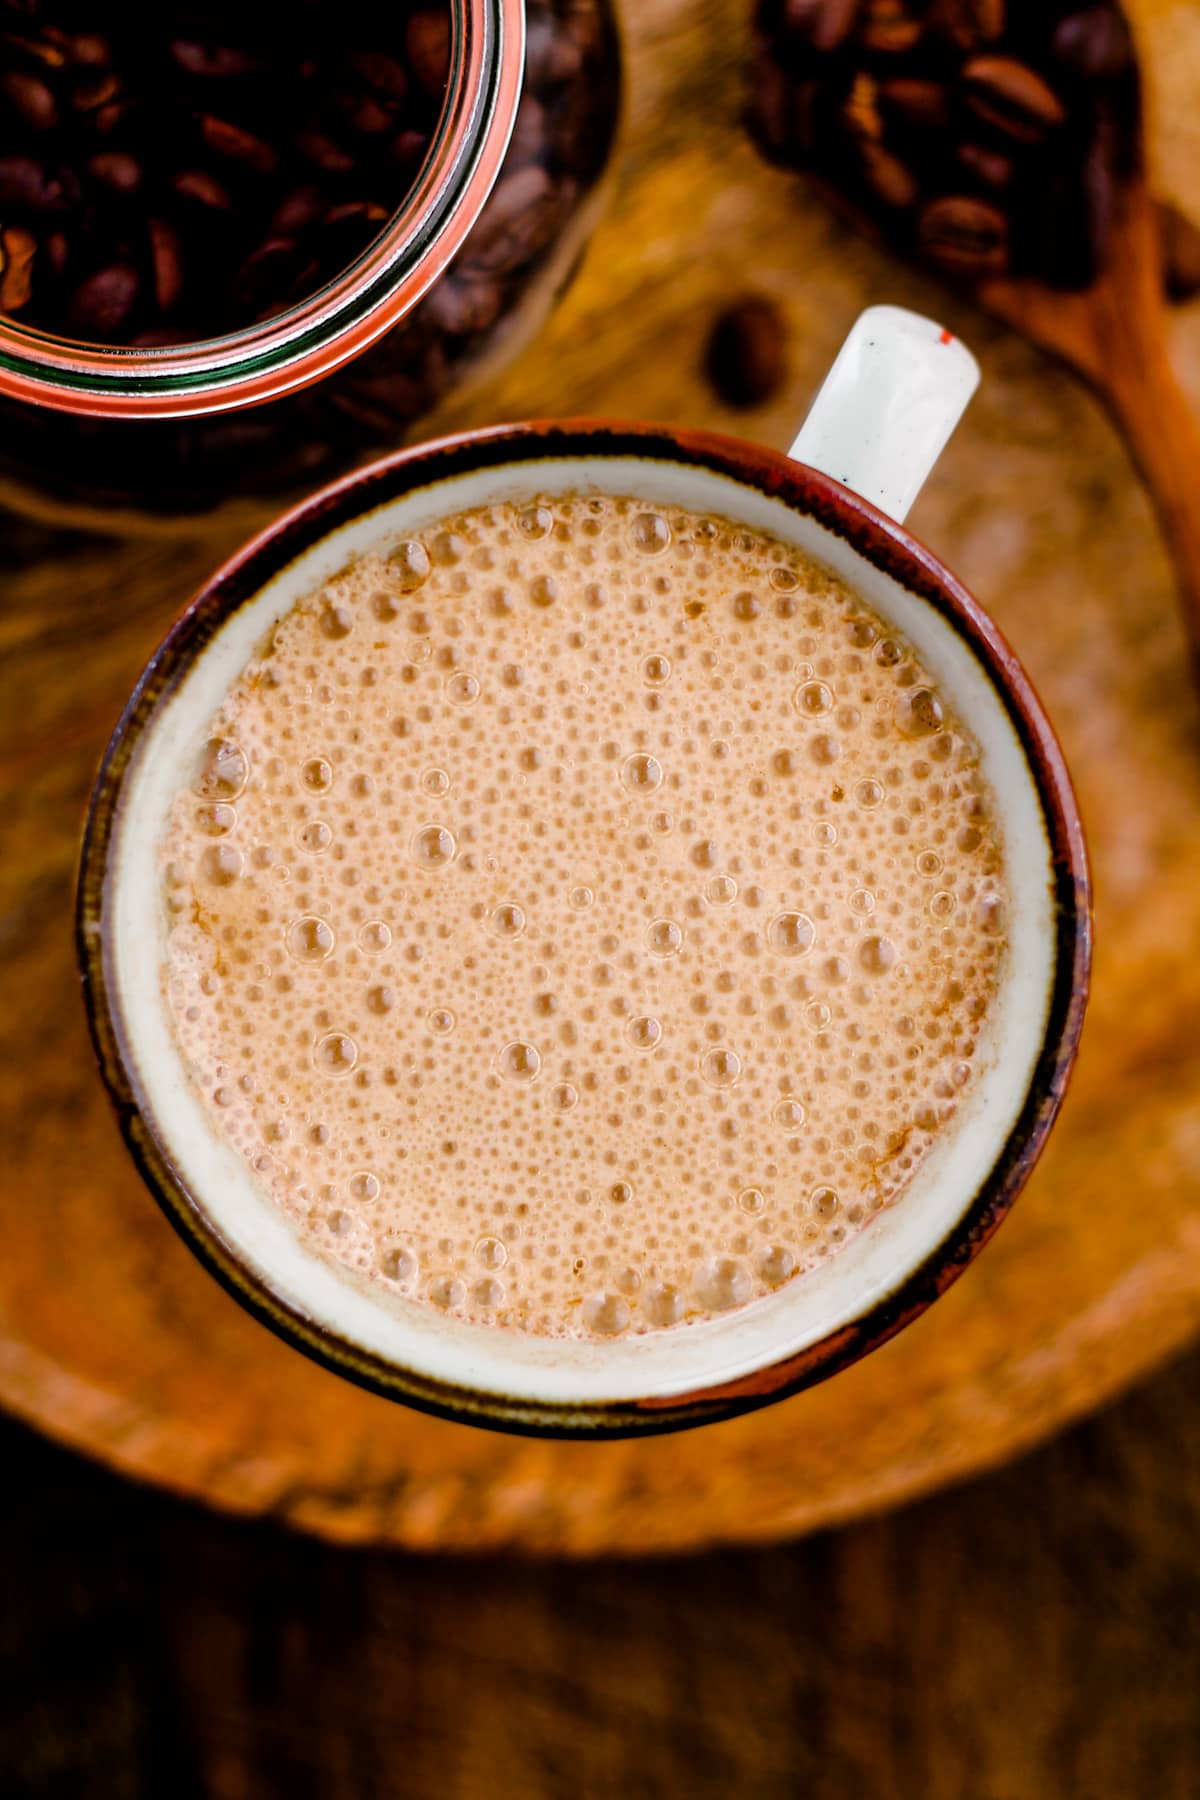 A mug filled with creamy Vegan Bulletproof Coffee on a wooden serving tray.